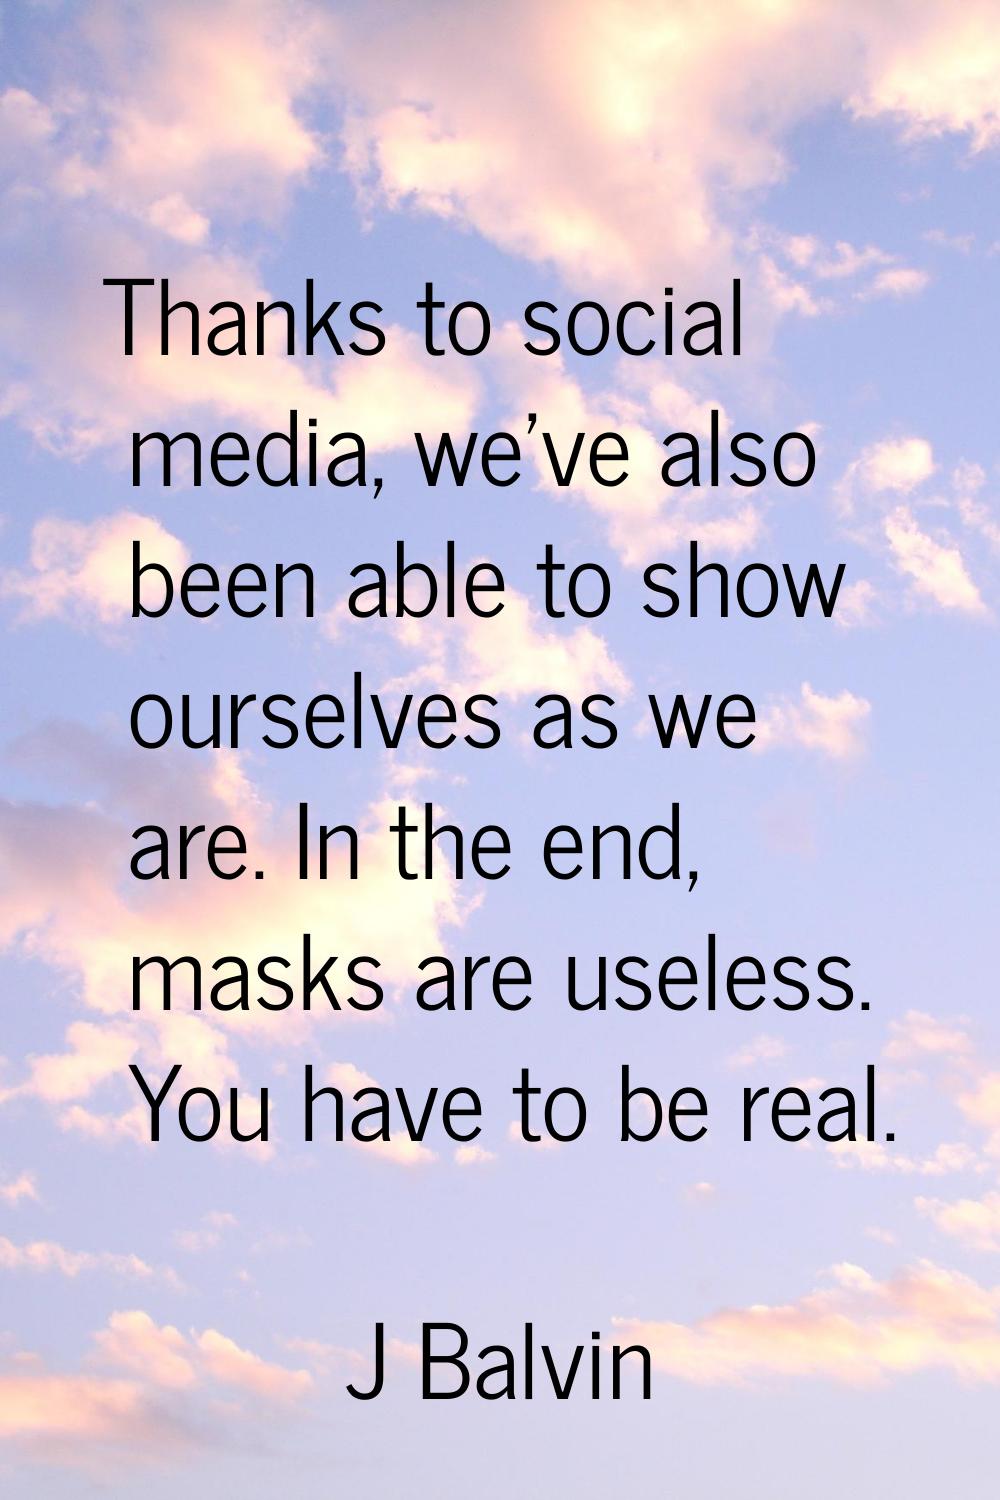 Thanks to social media, we've also been able to show ourselves as we are. In the end, masks are use